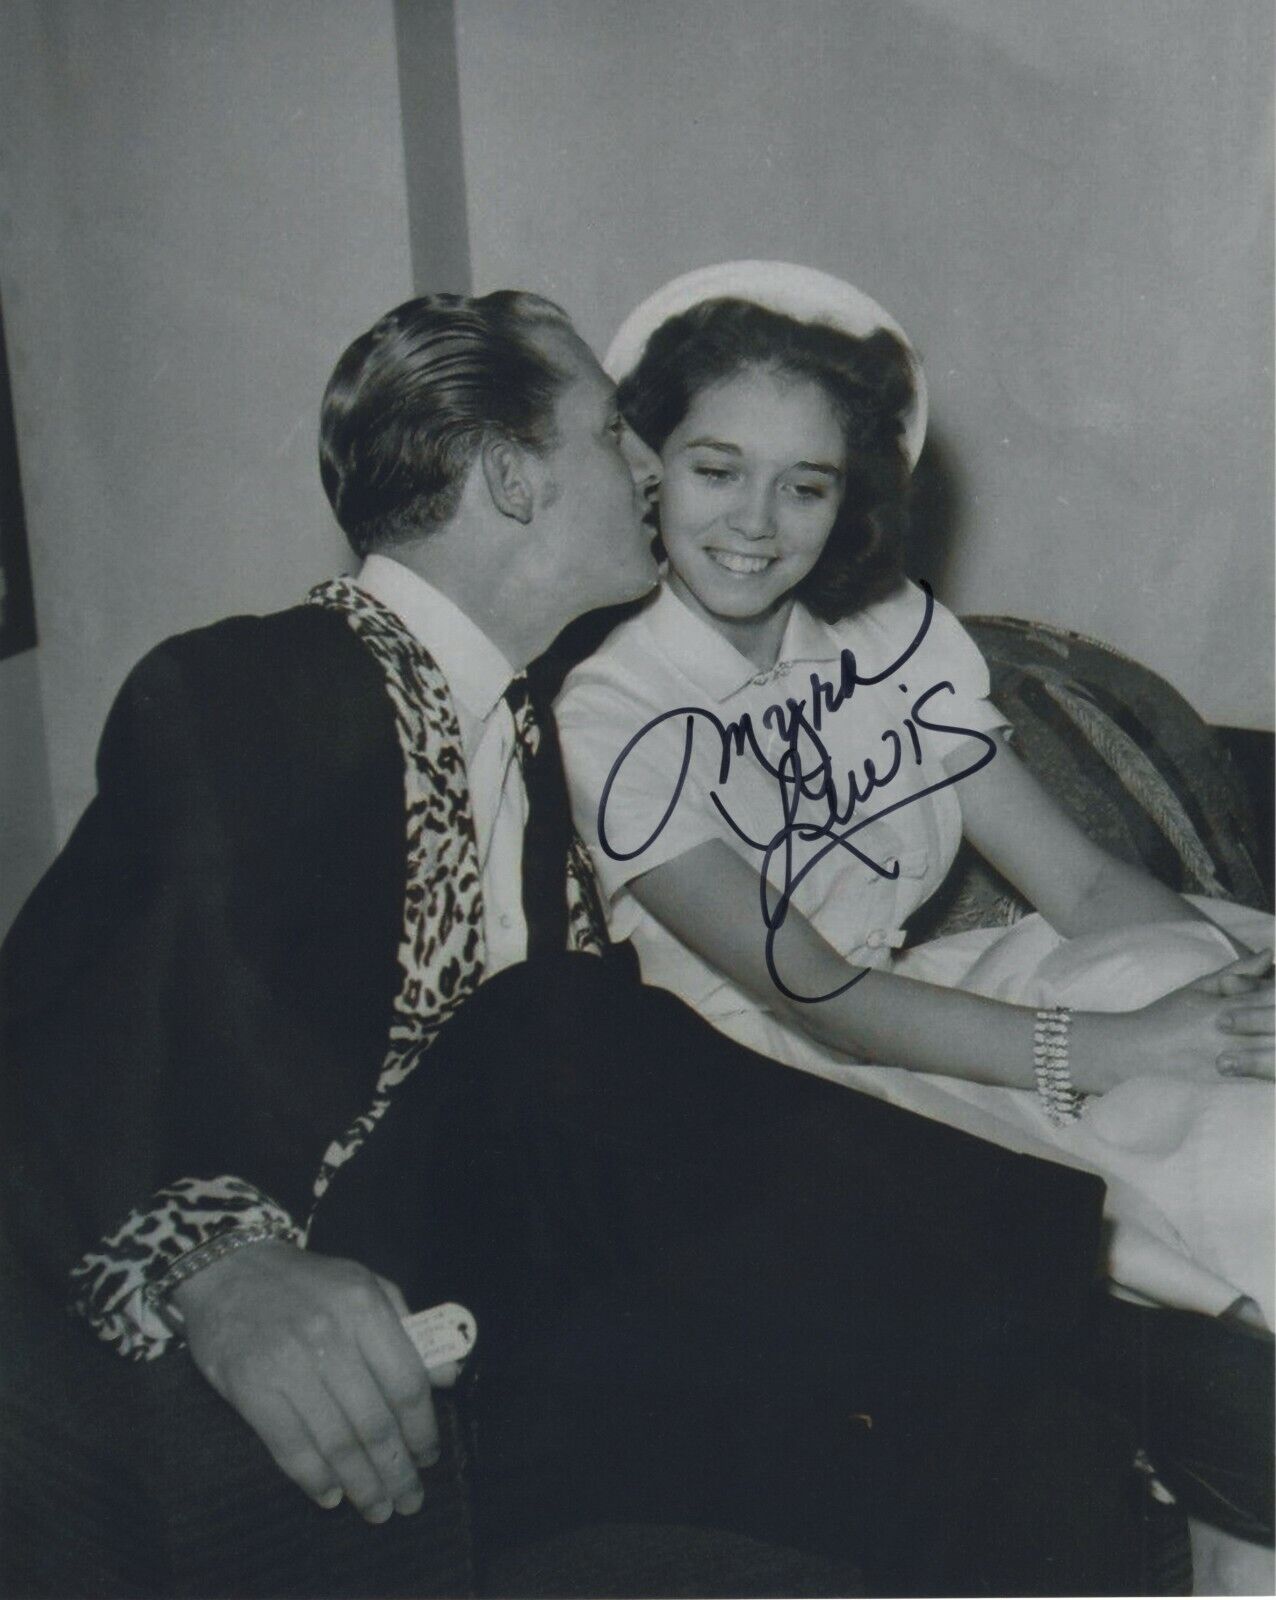 MYRA LEWIS SIGNED AUTOGRAPH 8X10 PHOTO WITH JERRY LEE LEWIS 